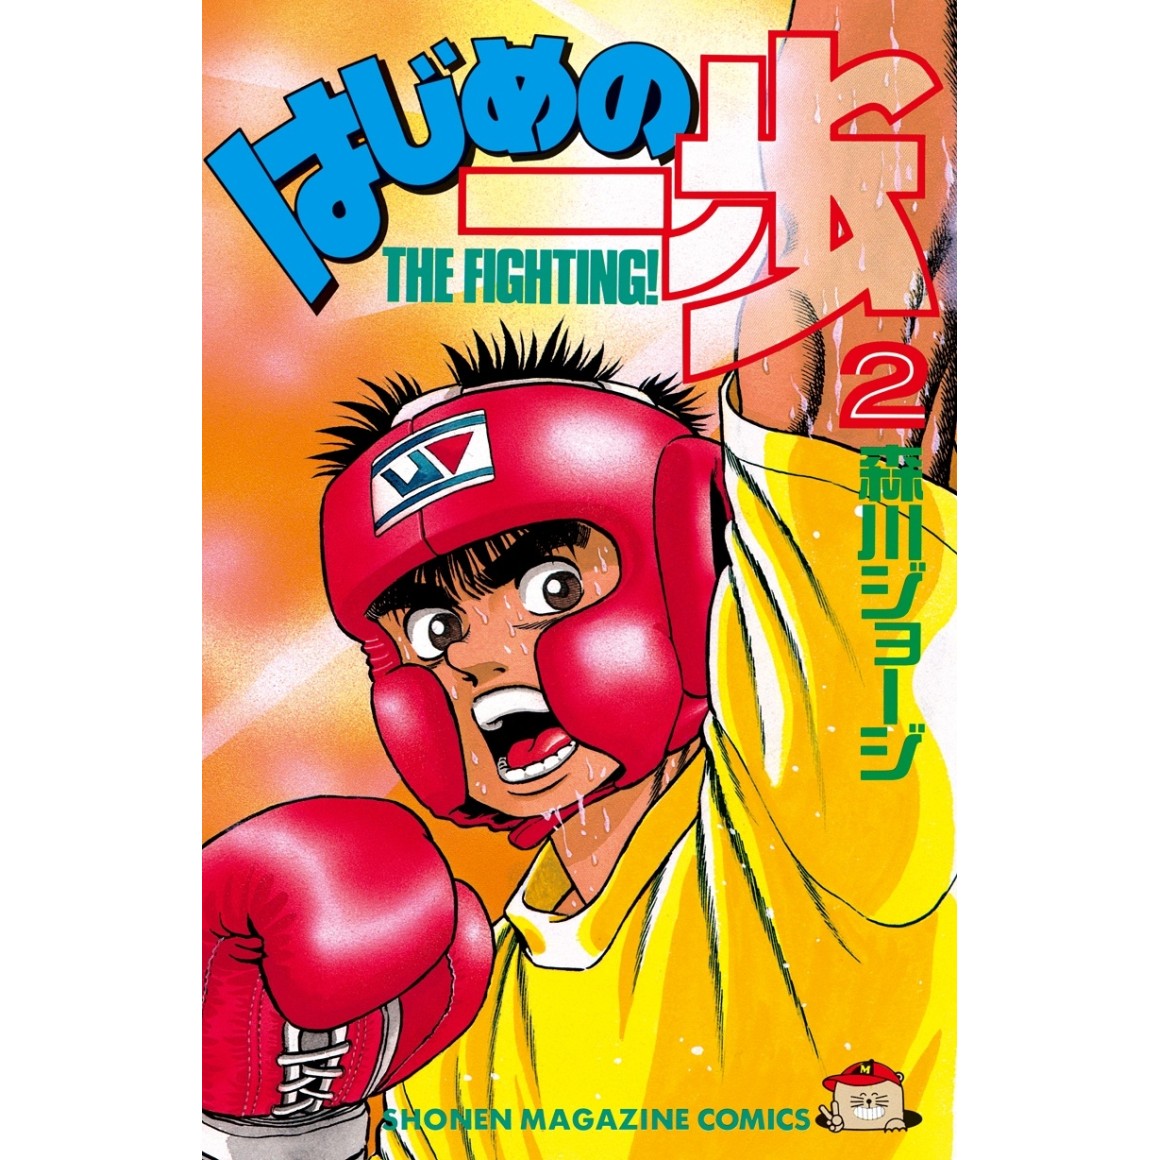 how old ippo is?how long can he keep boxing? and what will happen to  kamogawa? : r/hajimenoippo